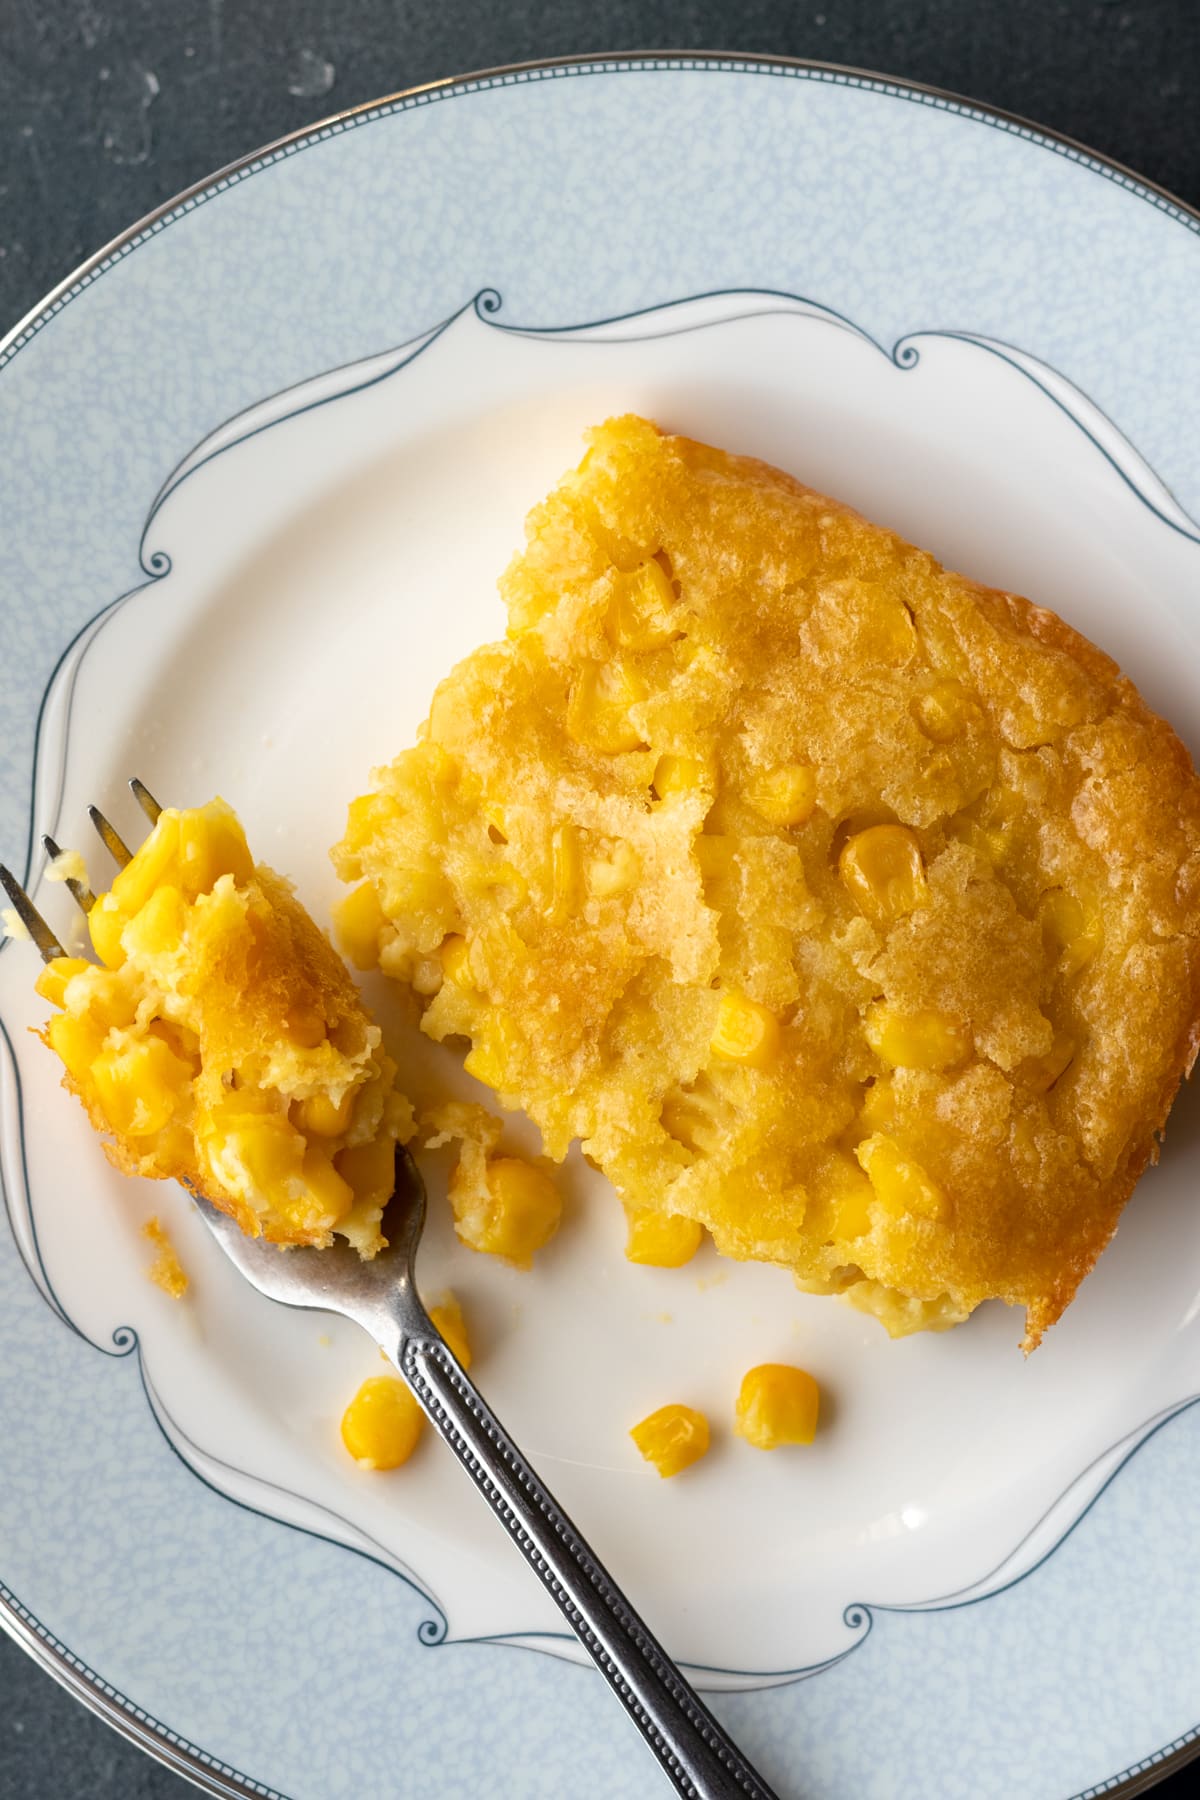 A slice of corn pudding on a plate.